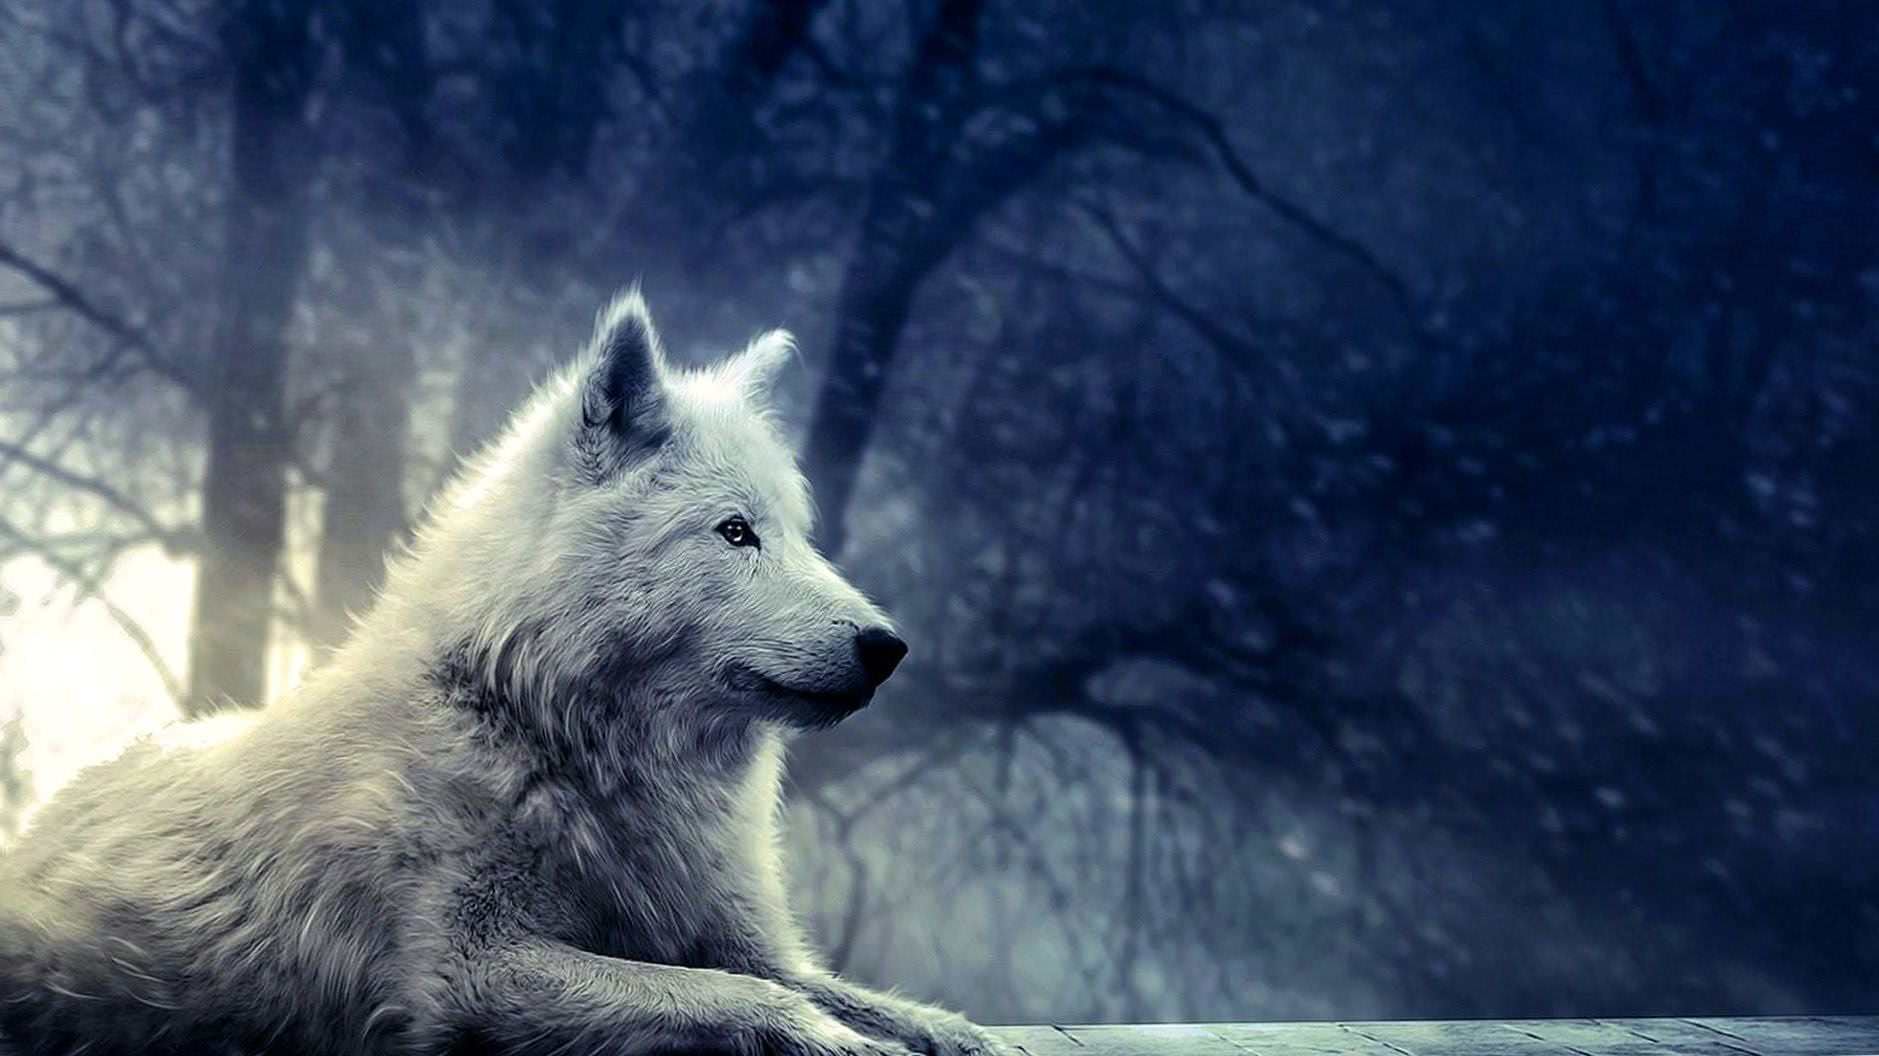 wolf wallpaper hd pc background image 3